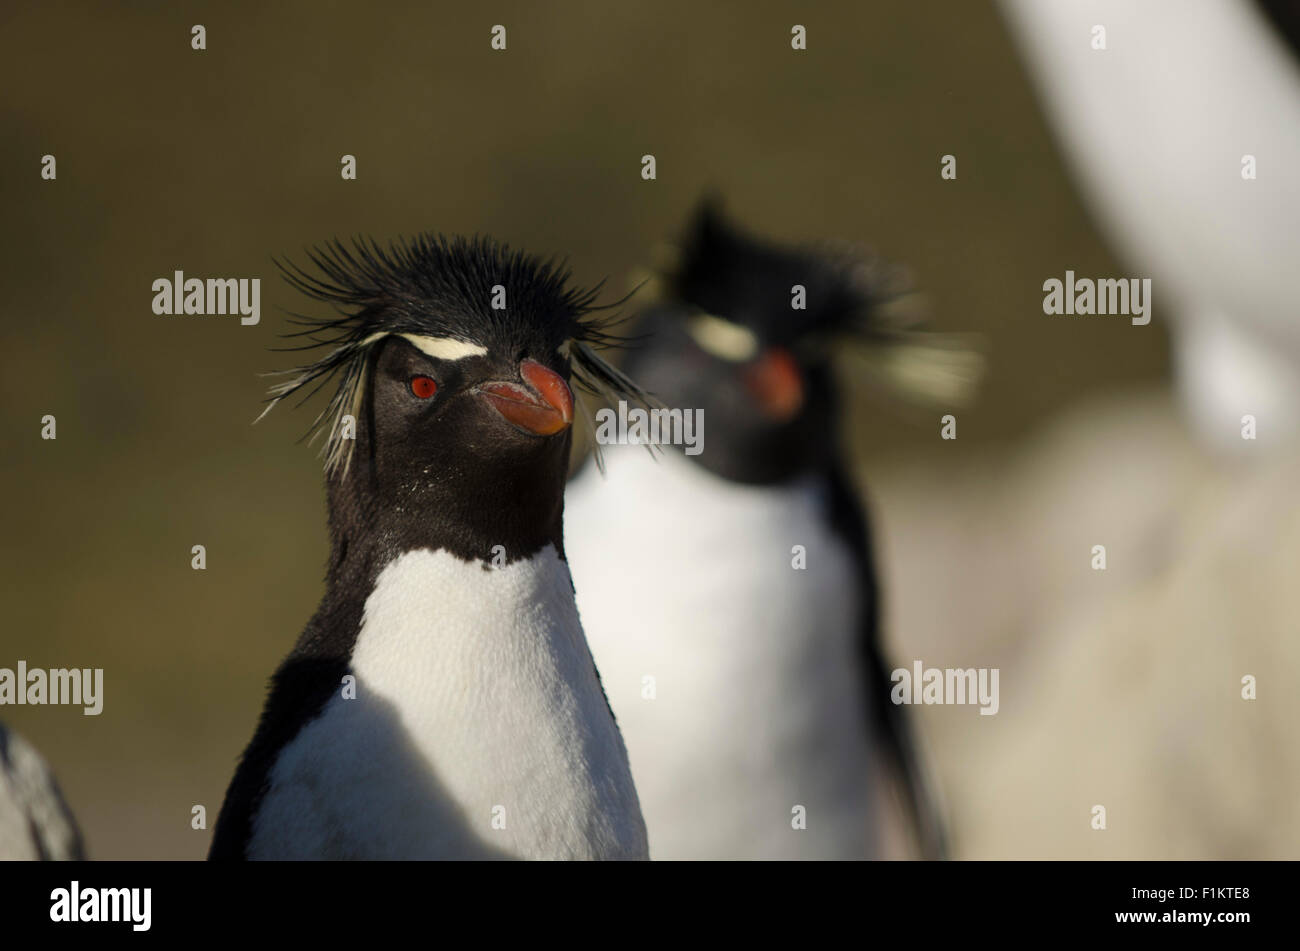 Southern rockhopper penguins Eudyptes chrysocome from the Falkland Islands Stock Photo